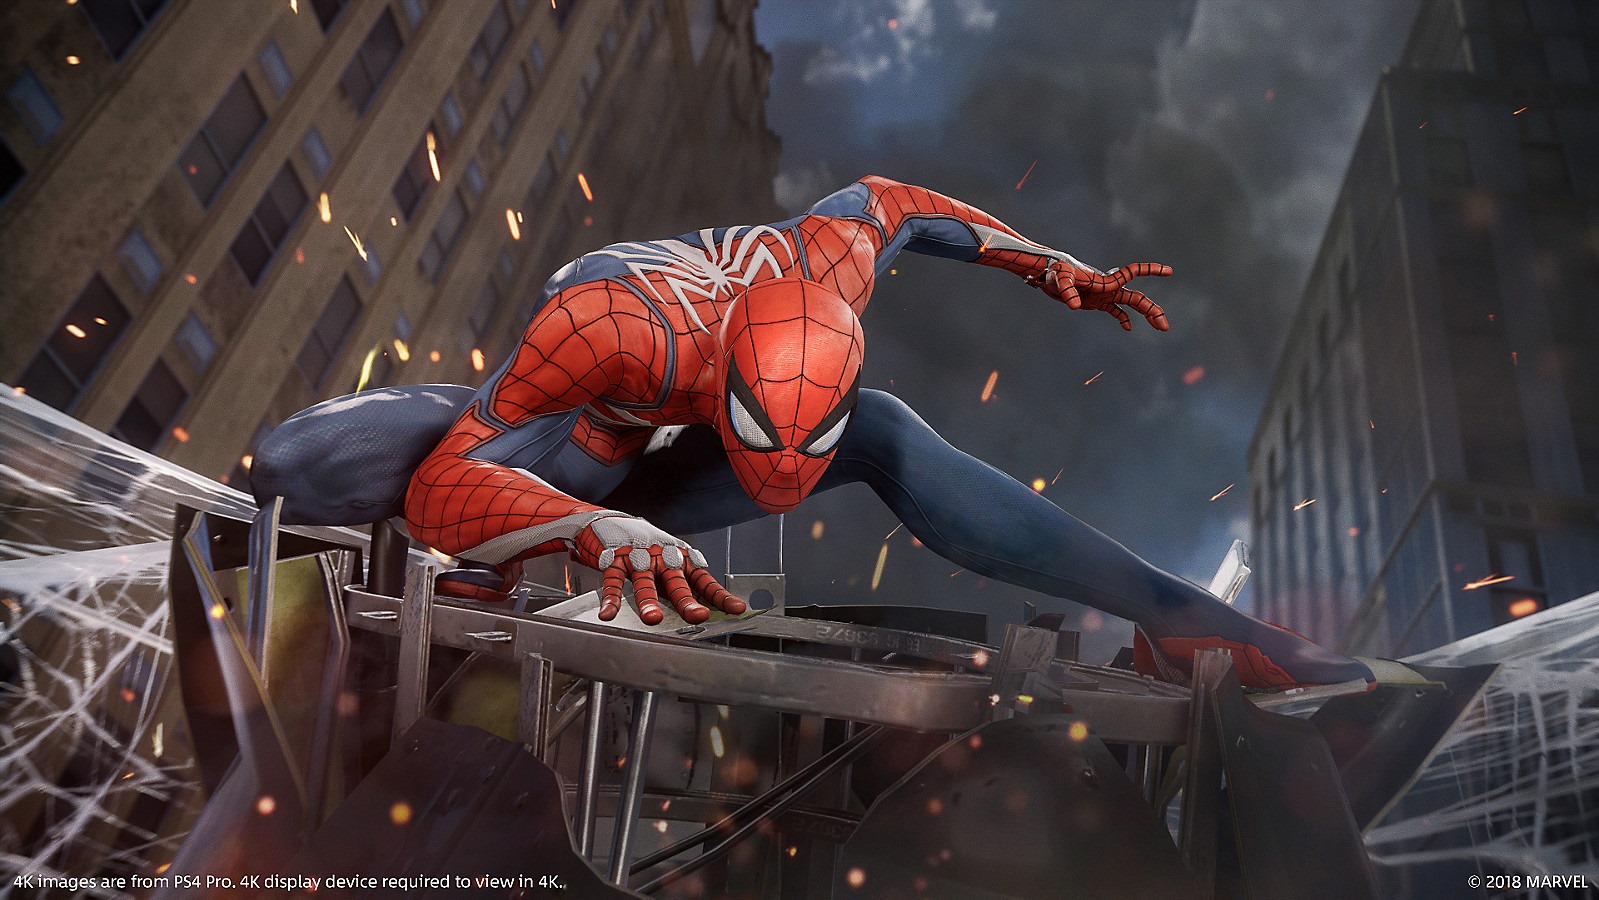 Marvel's Spider-Man 2's day-one patch on PS5 is at least optional